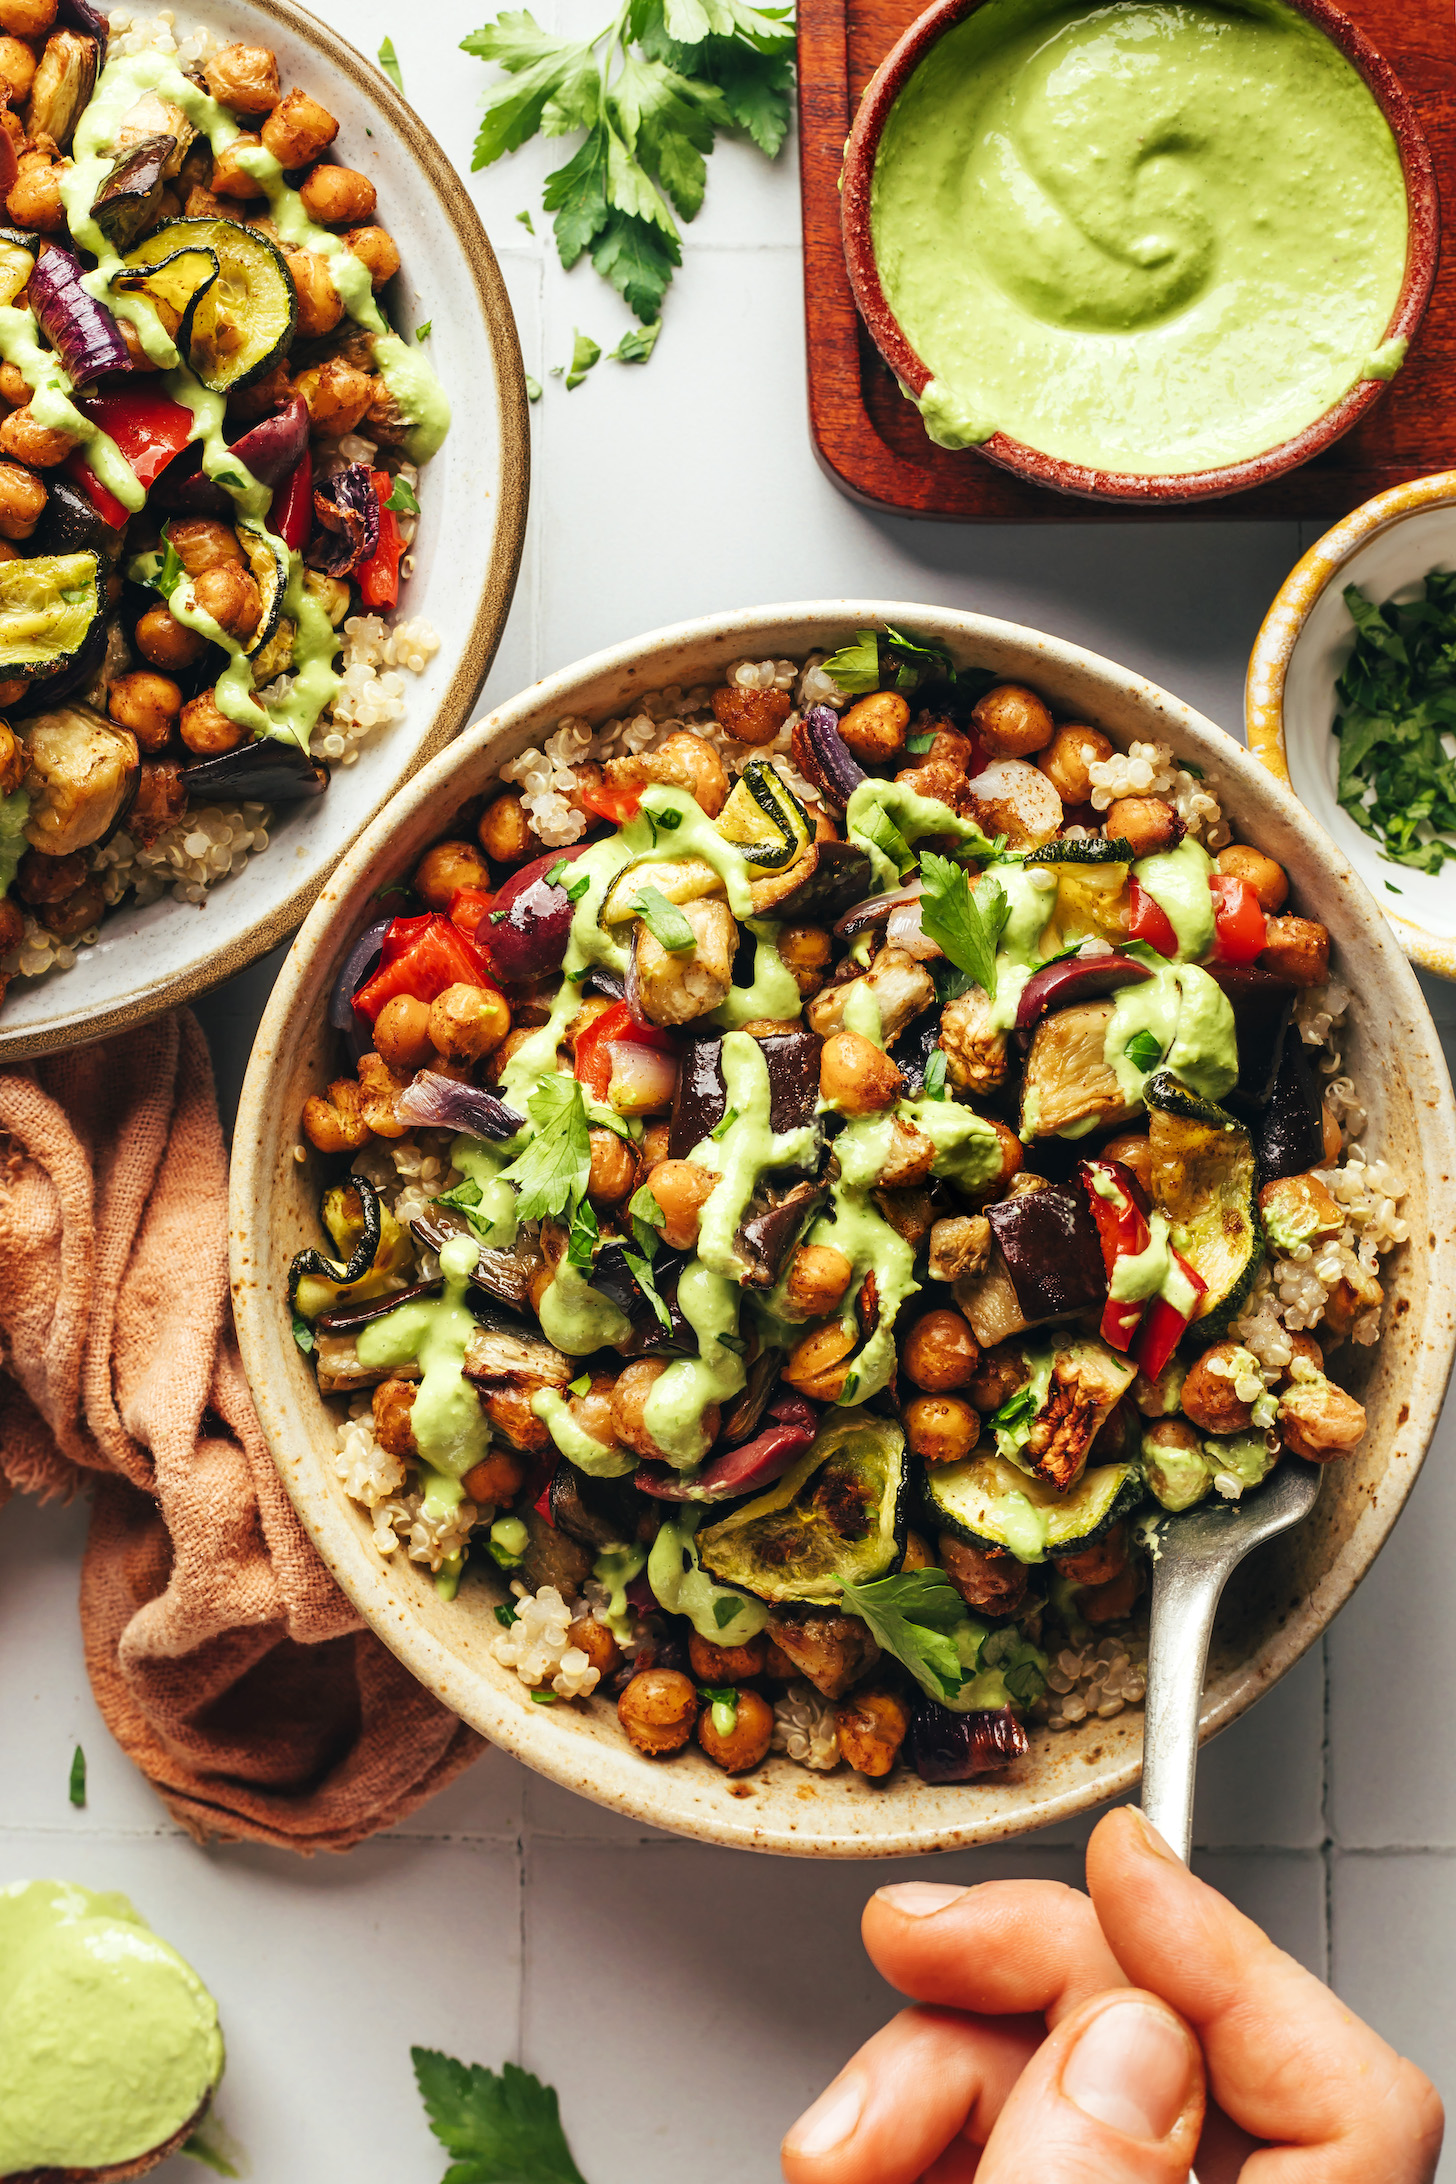 Drizzle green tahini sauce and serve in a bowl with two roasted veggies and chickpeas on the side.